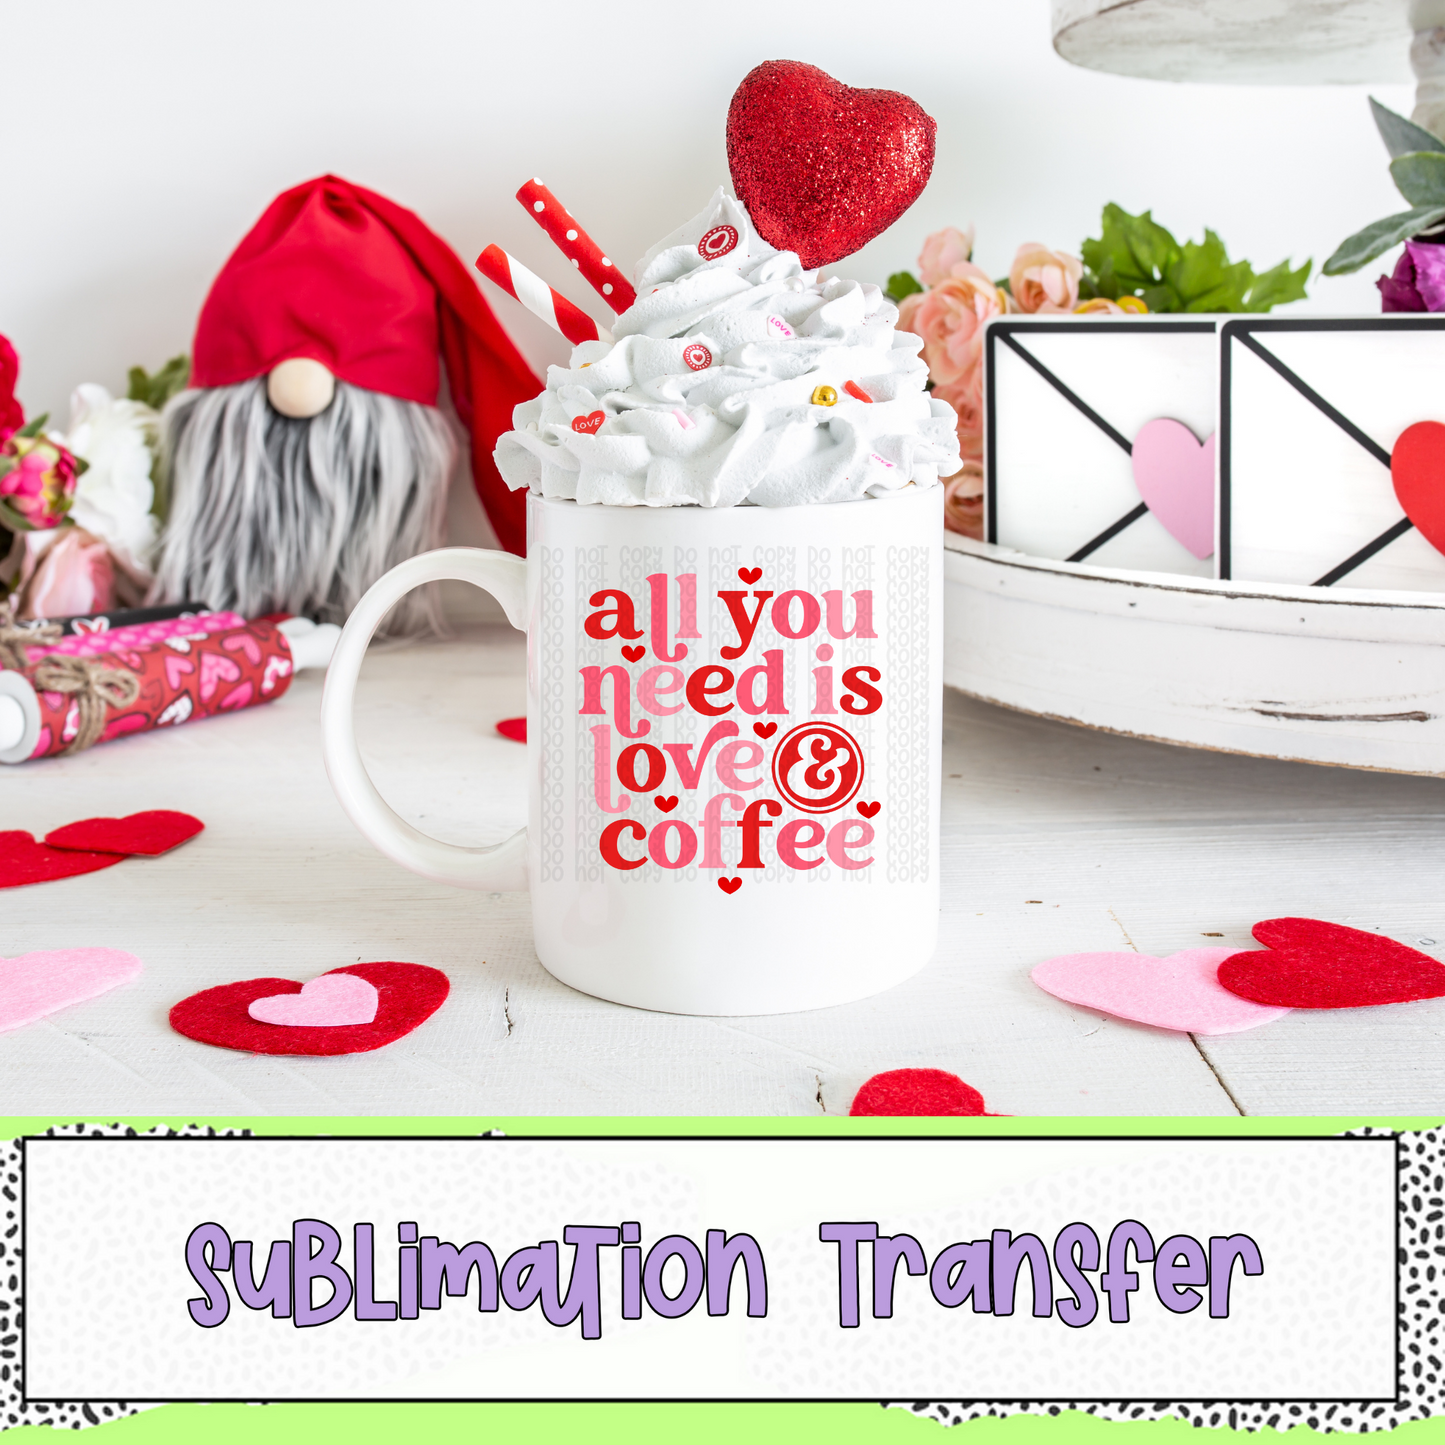 All You Need is Love & Coffee - SUBLIMATION TRANSFER